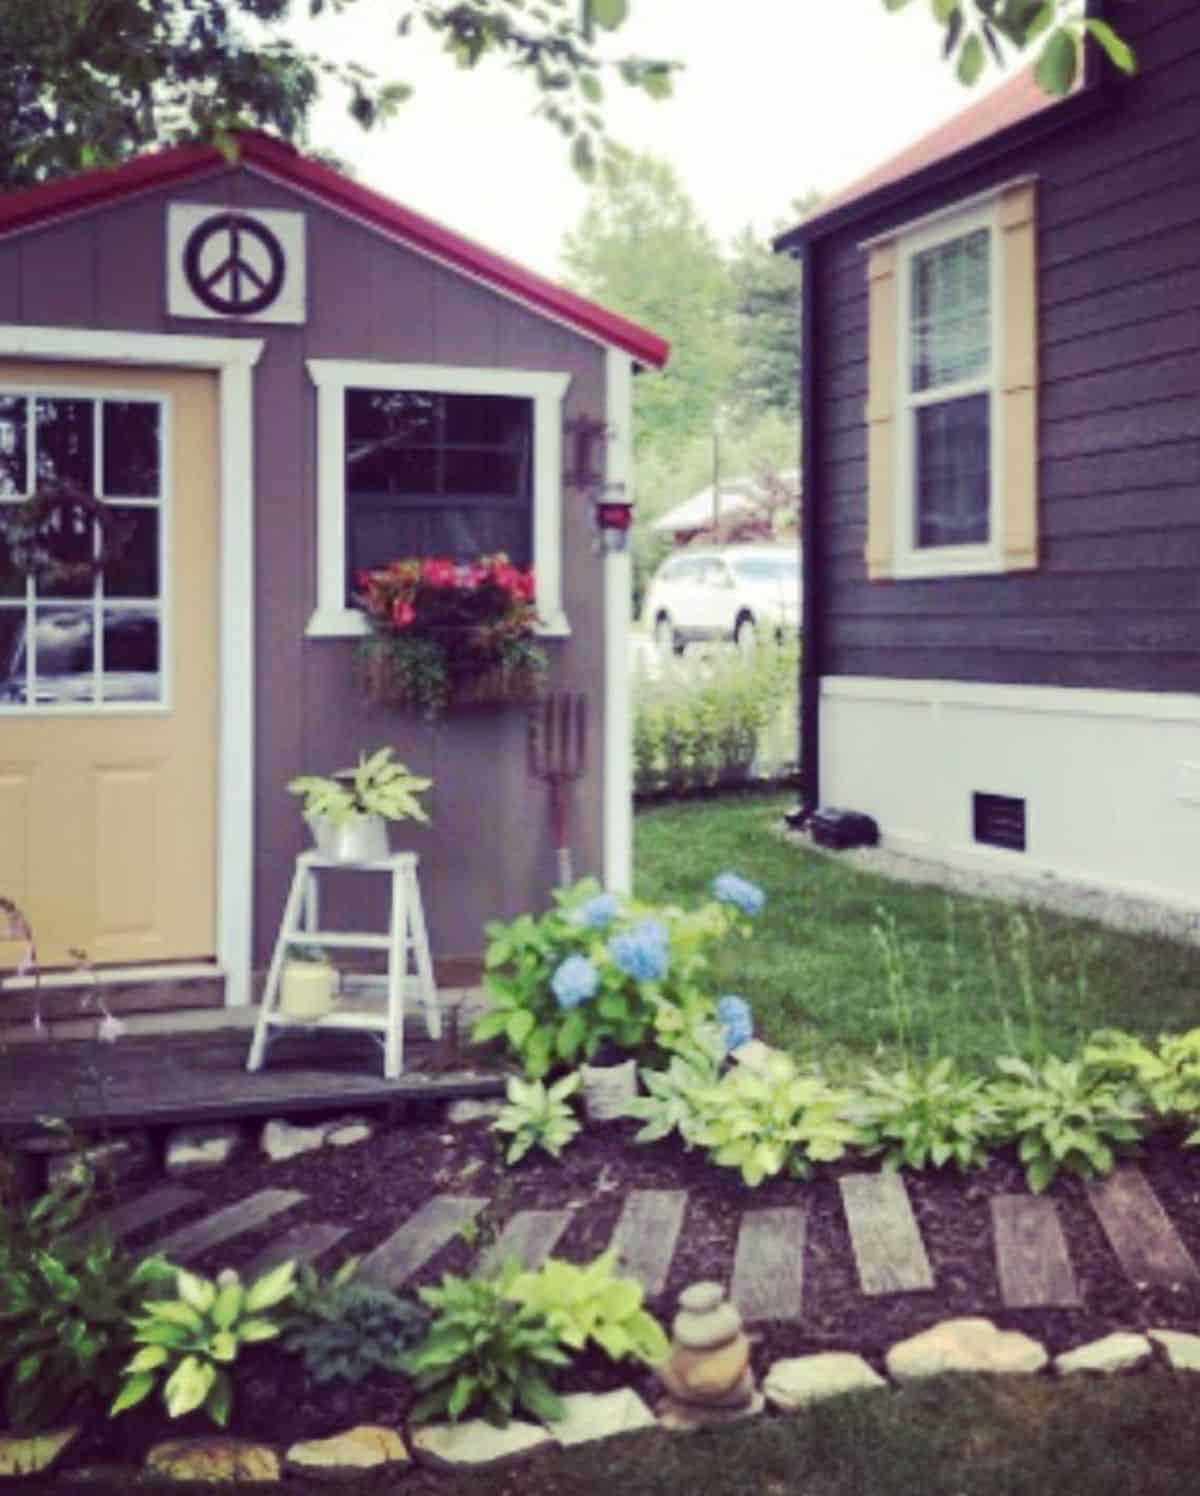 Main entrance view of tiny home in Simple Life Community